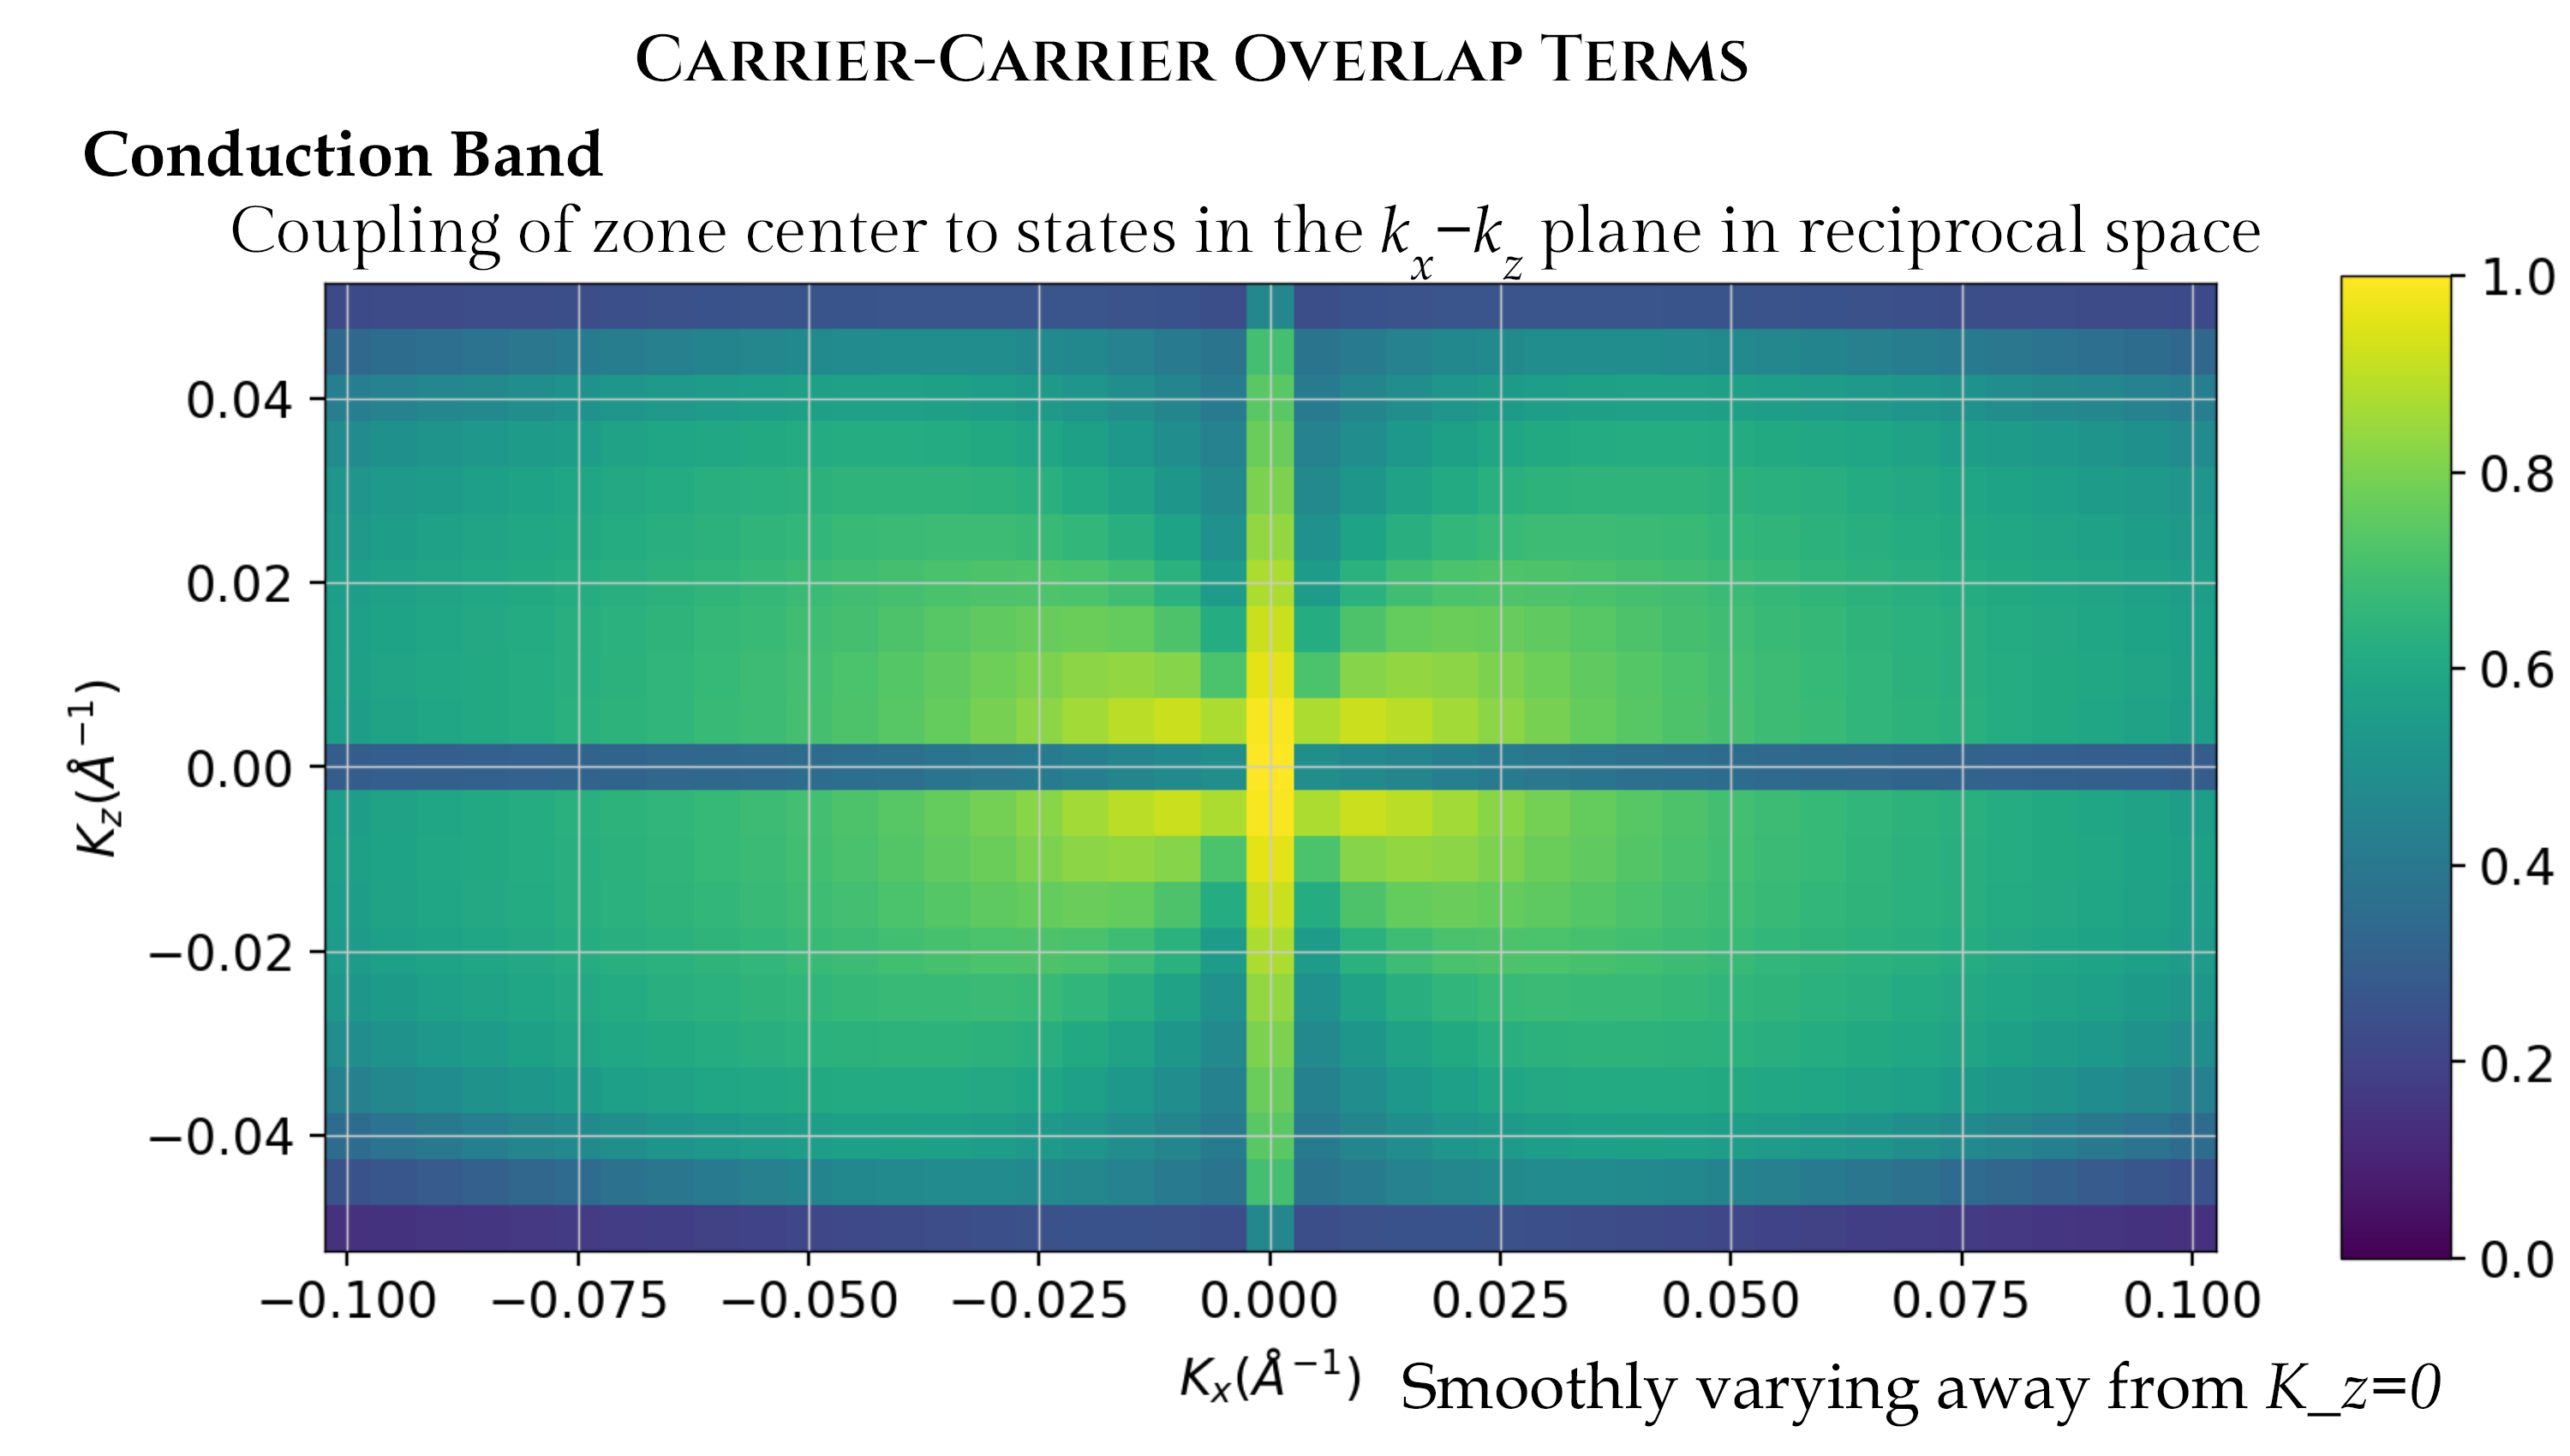 Carrier-Carrier Overlap Terms - Conduction Band